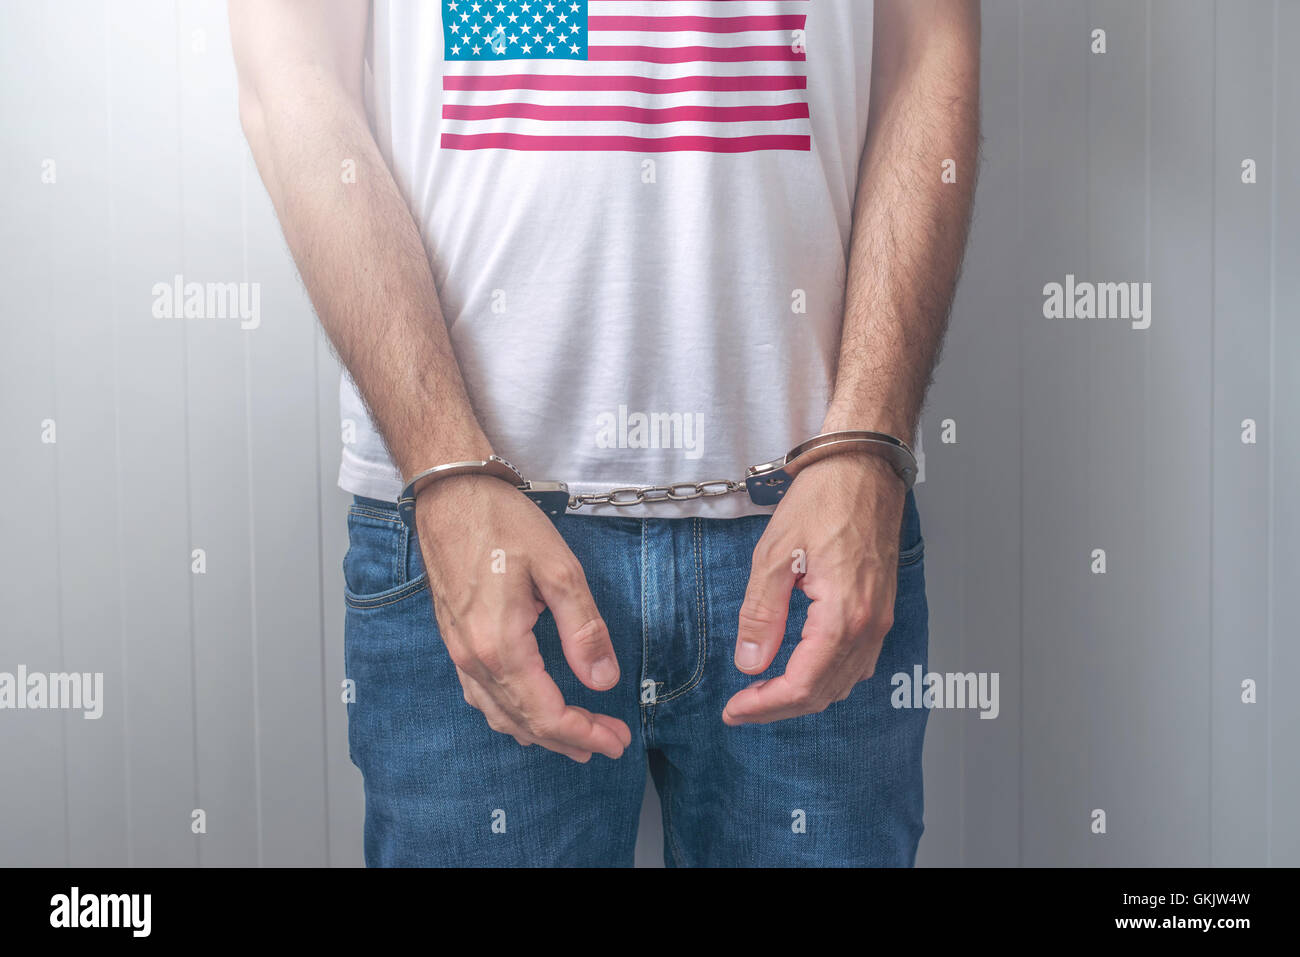 Arrested man with cuffed hands wearing shirt with USA flag. Unrecognizable male person in jeans with handcuffs held in police st Stock Photo